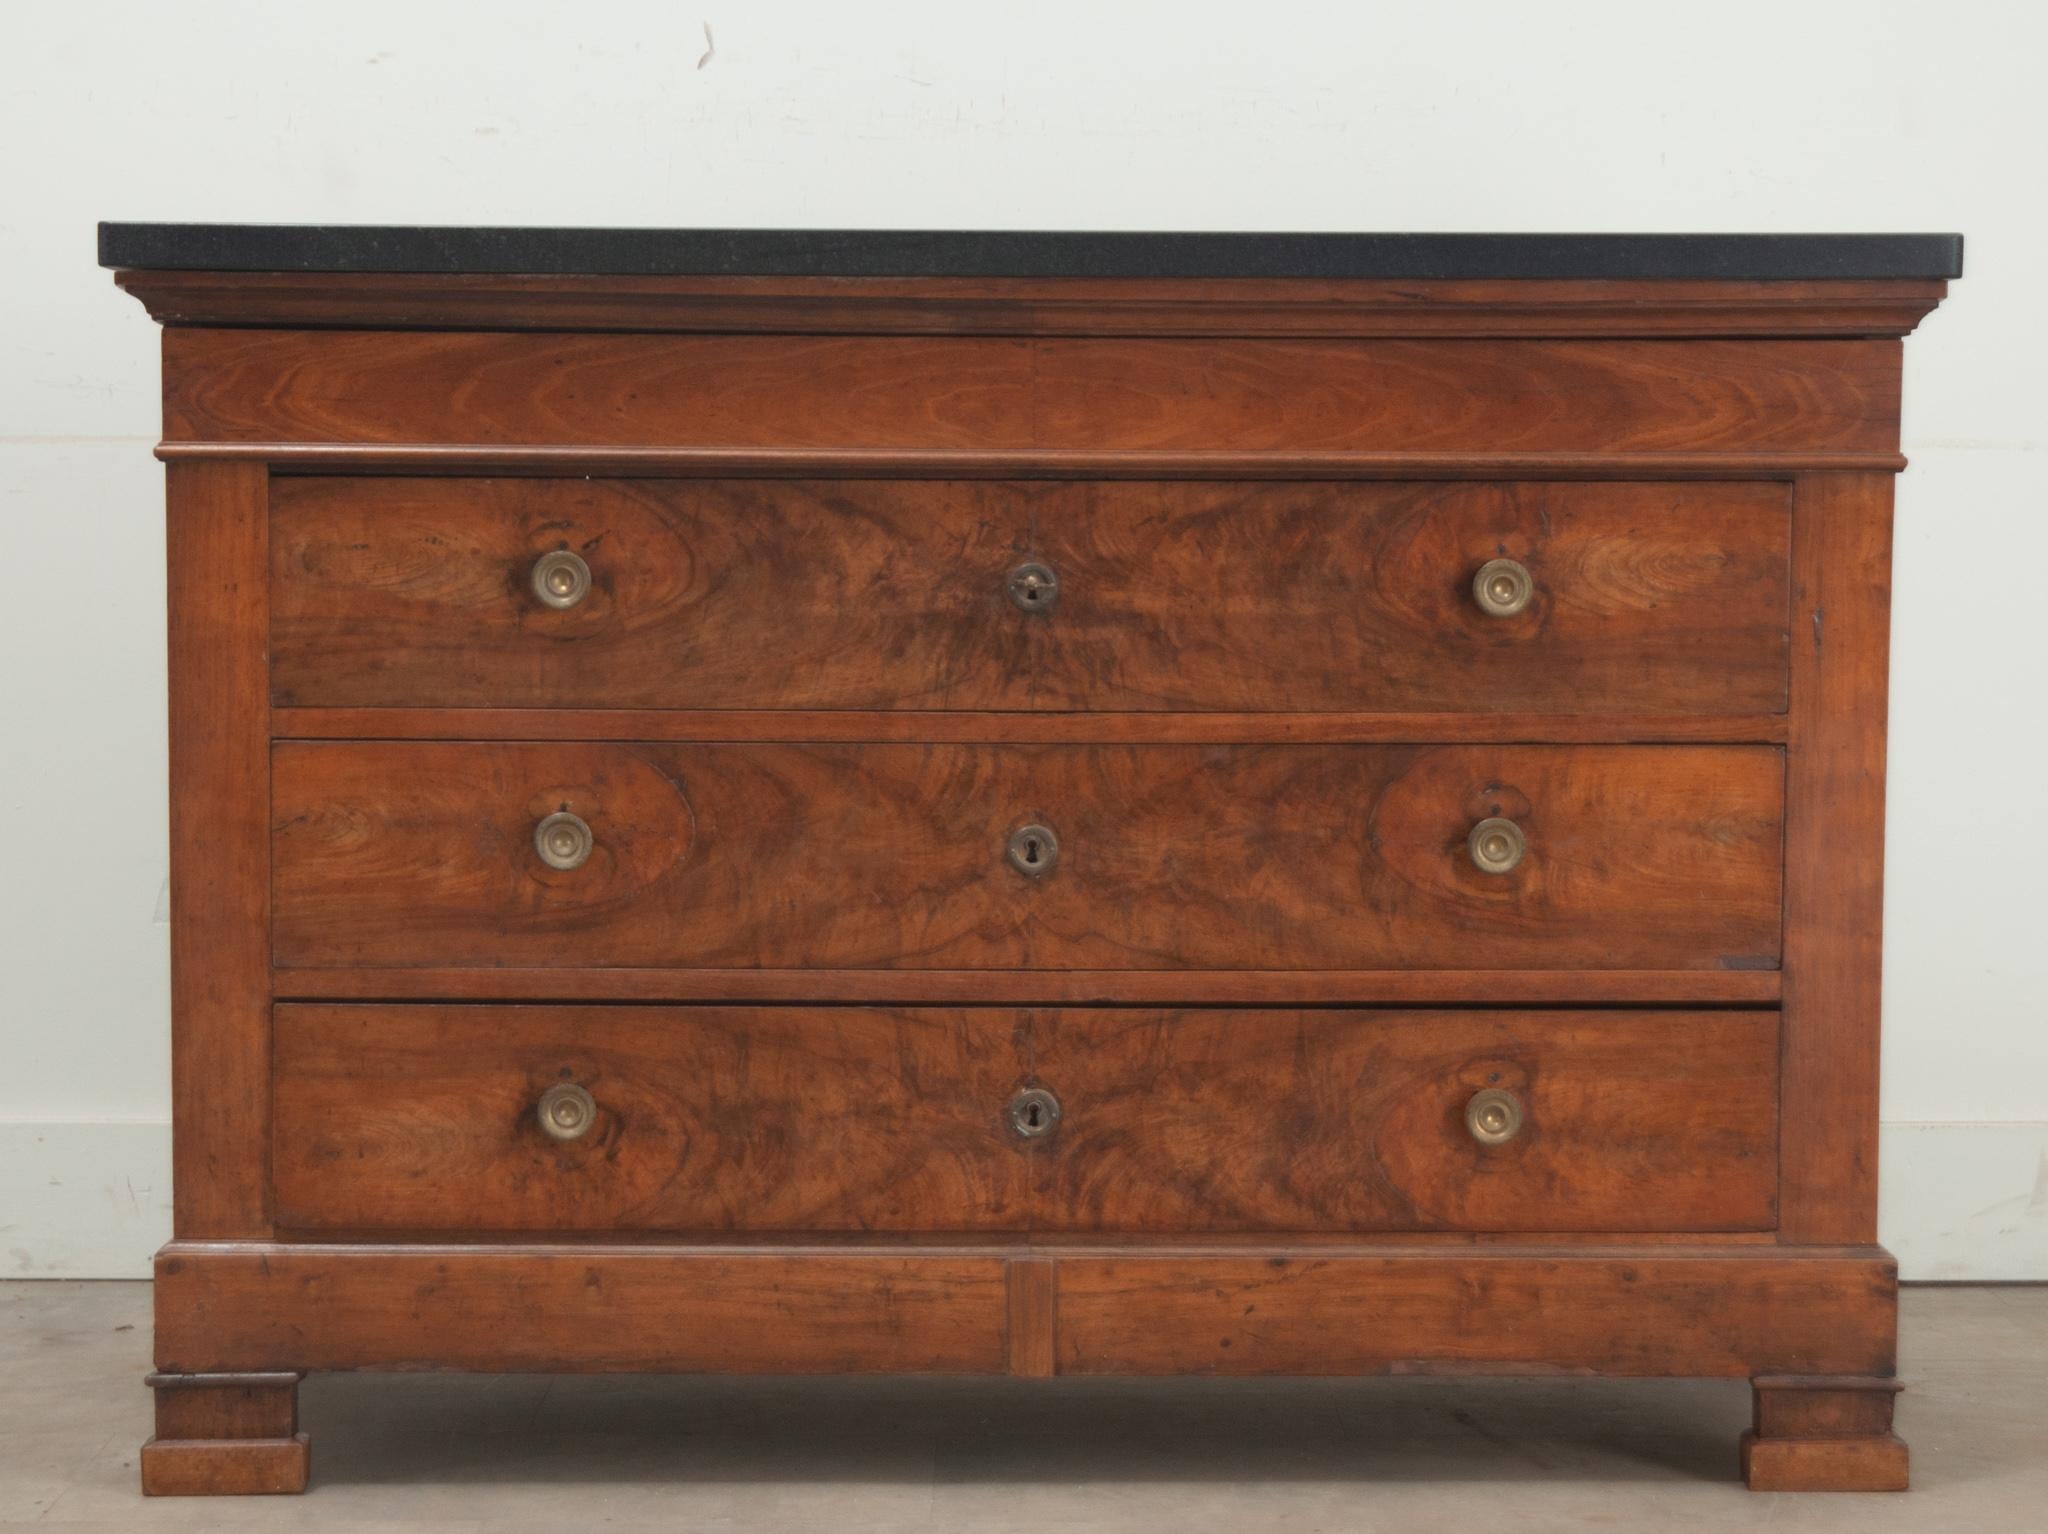 A French walnut commode from 19th Century France. The black marble top is more recent and compliments the cabinet base. There are four total drawers in this chest. The first drawer is hidden just below the new marble top. Below are three burl and